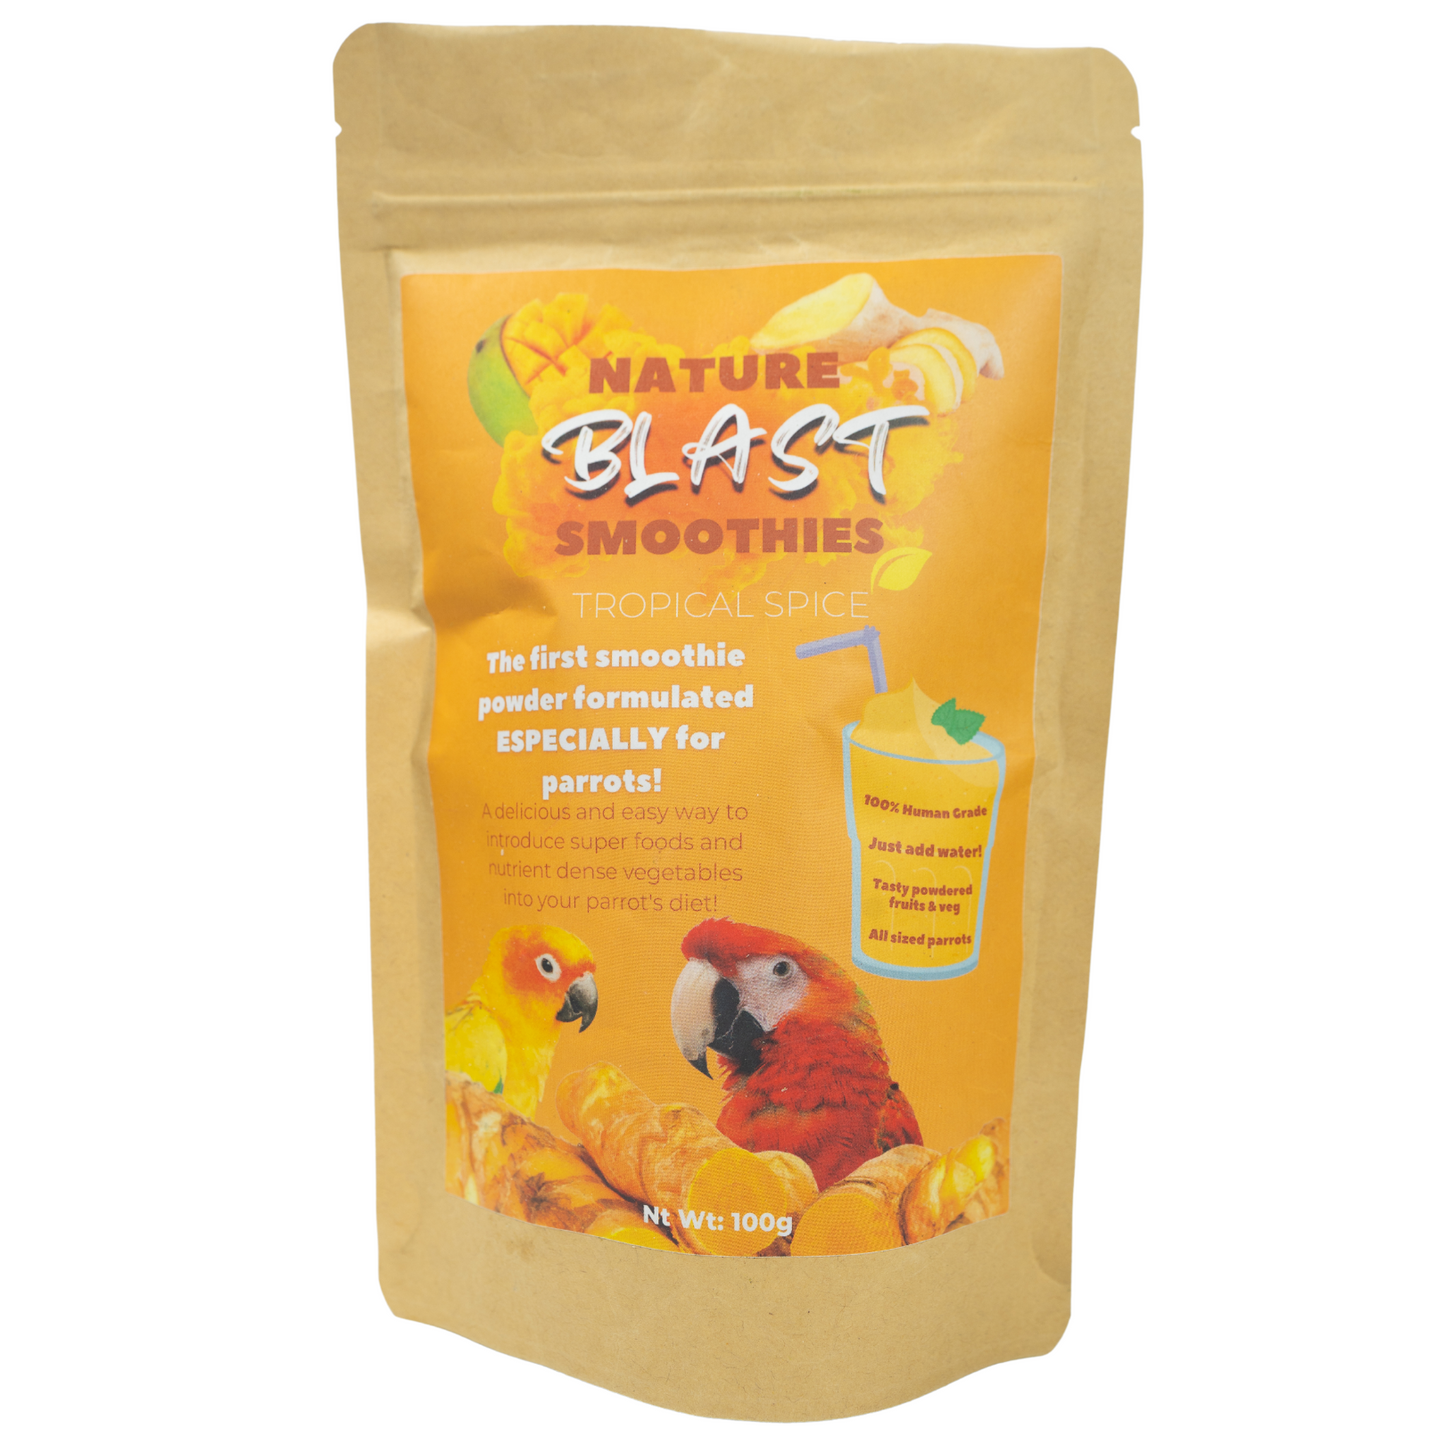 Tropical Spice - Nature Blast Parrot Smoothies